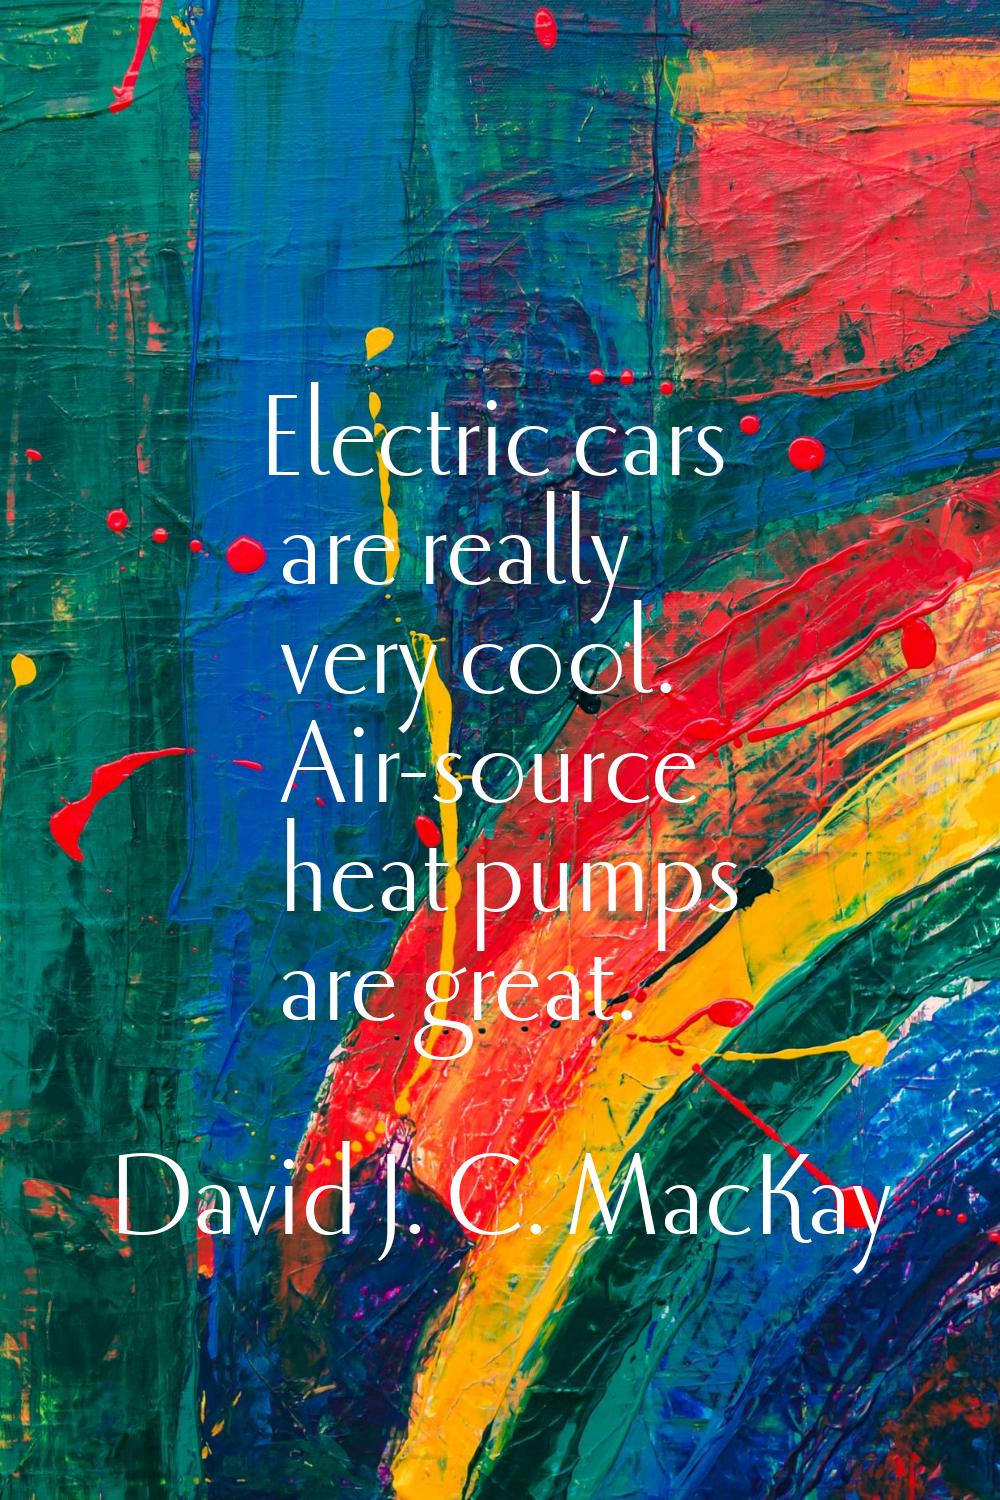 Electric cars are really very cool. Air-source heat pumps are great.